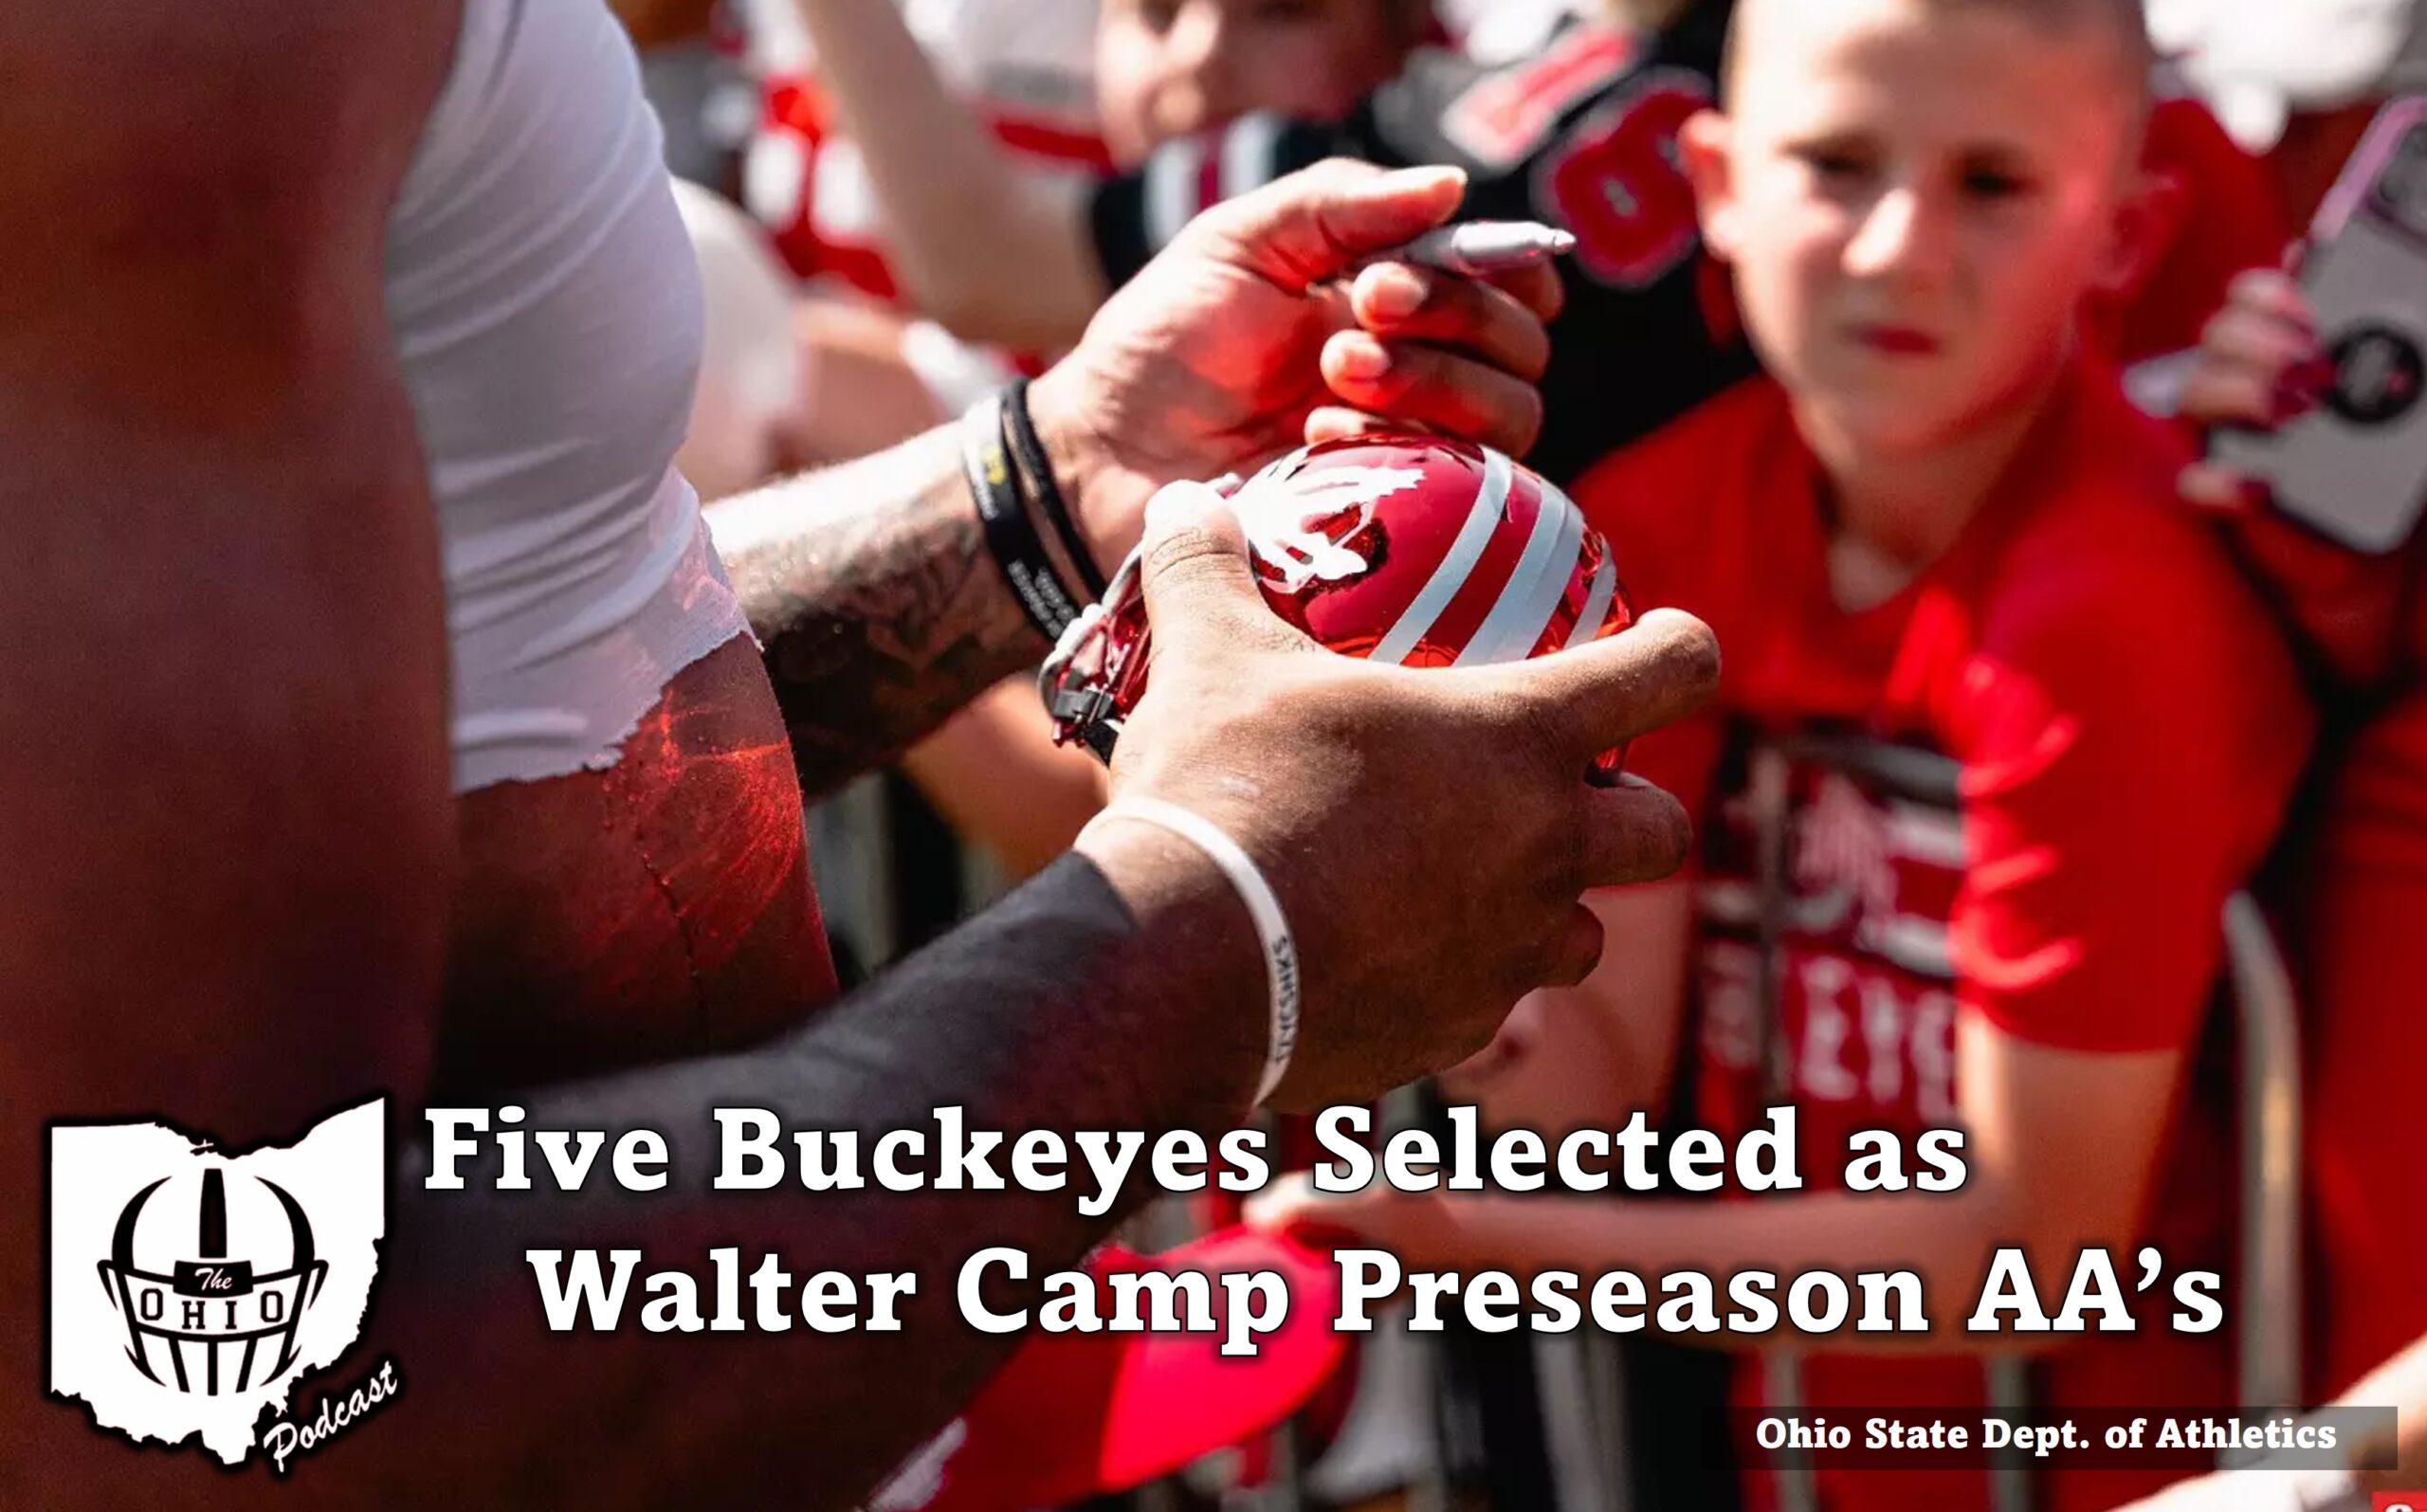 Ohio State Leads with Five Players on Walter Camp Preseason All-American Teams